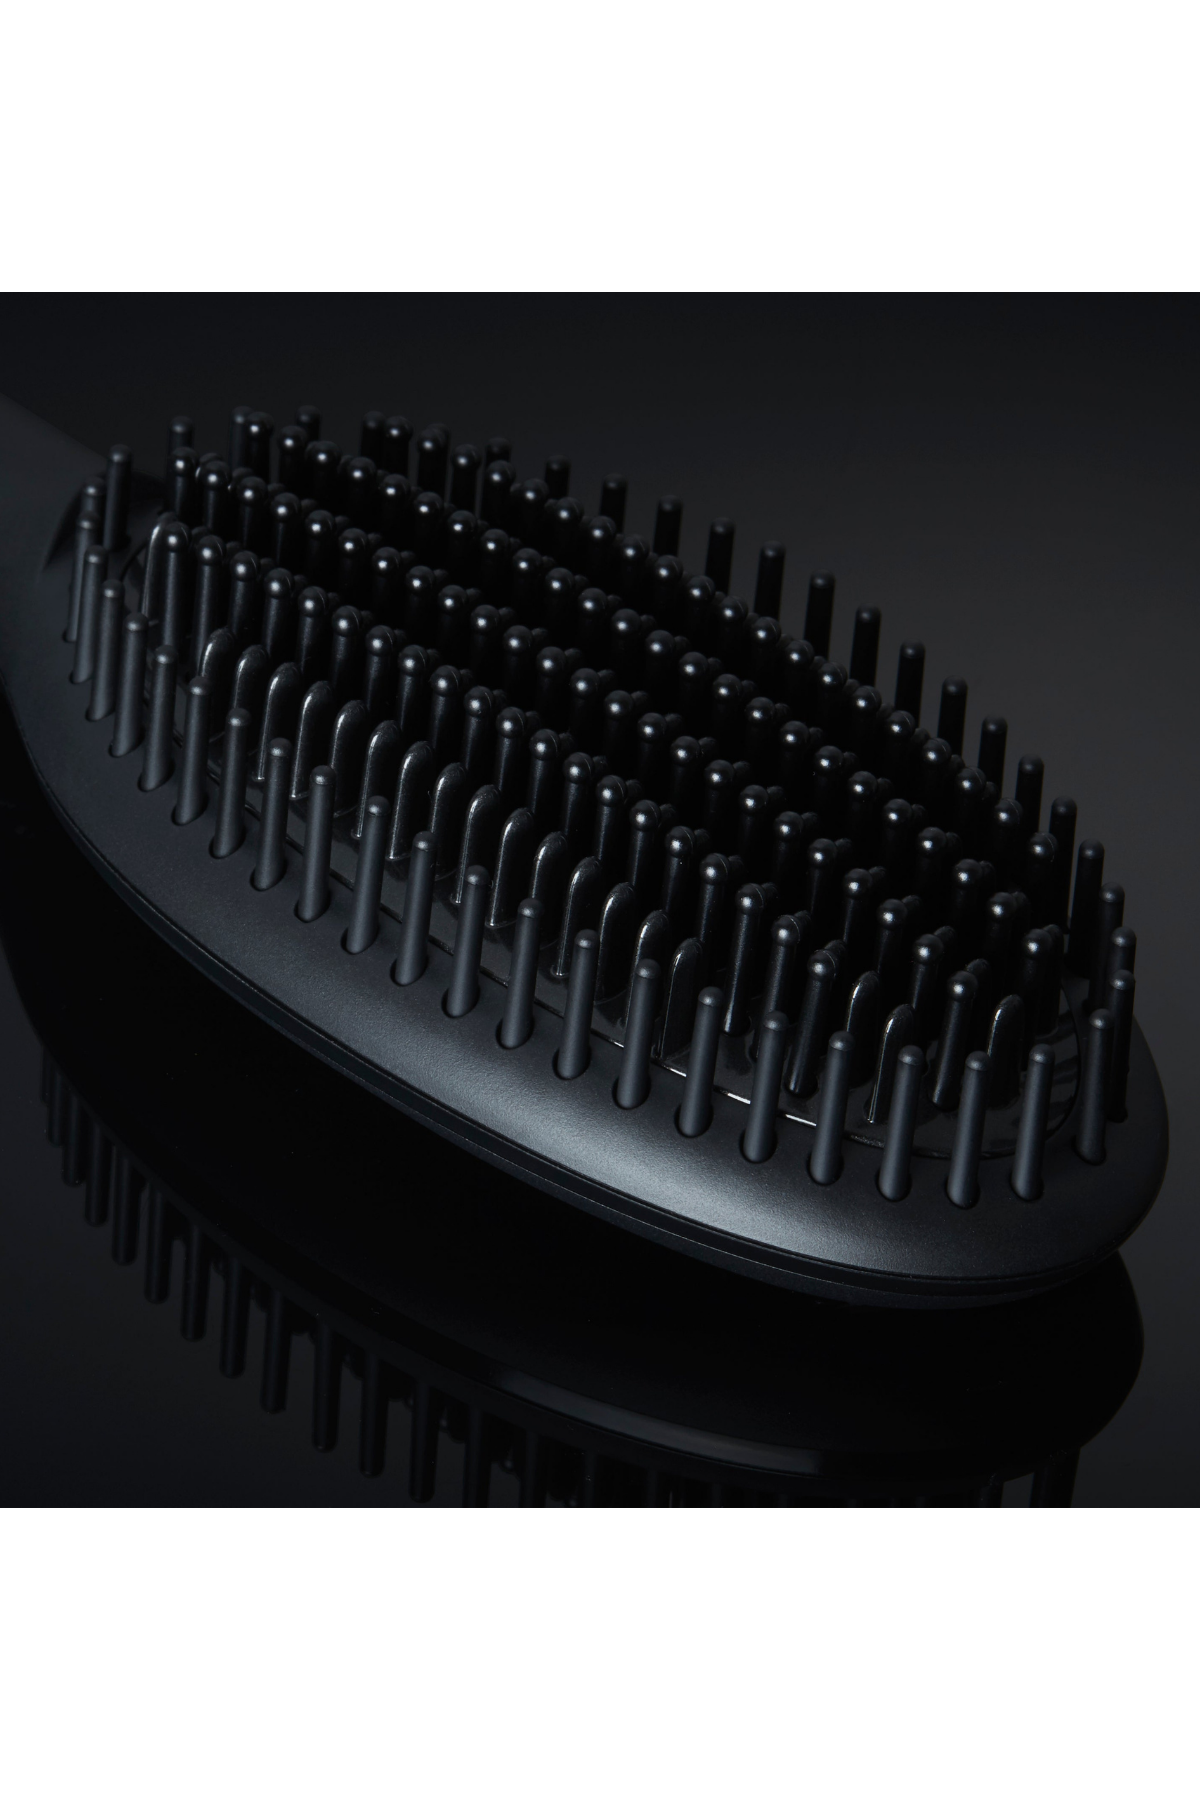 GHD GLIDE SMOOTHING HOT BRUSH